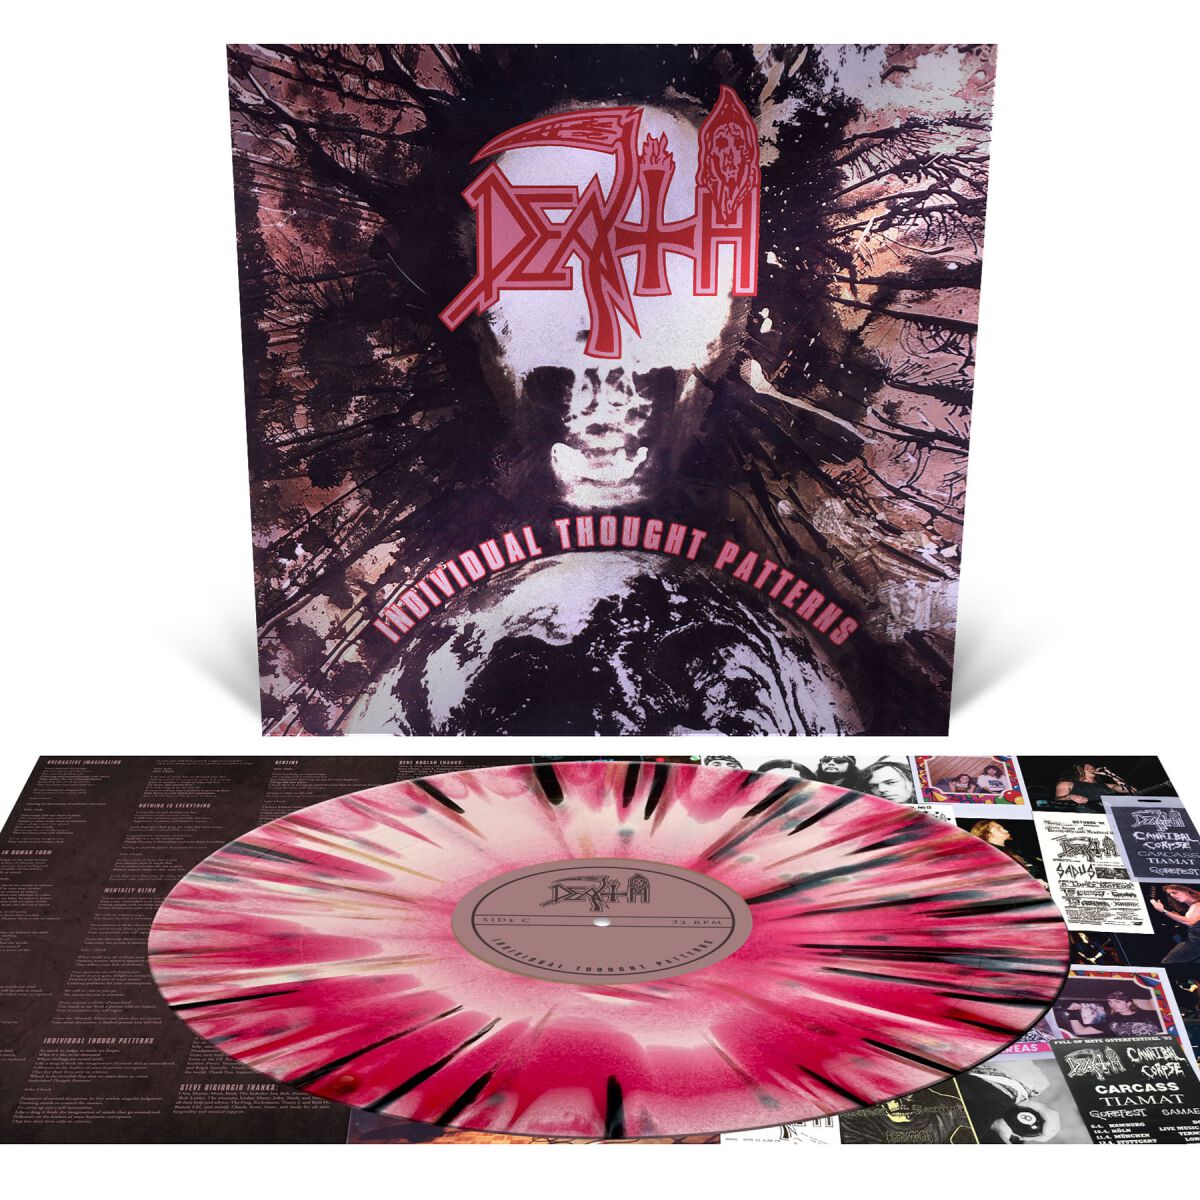 Death Individual thought patterns LP multicolor